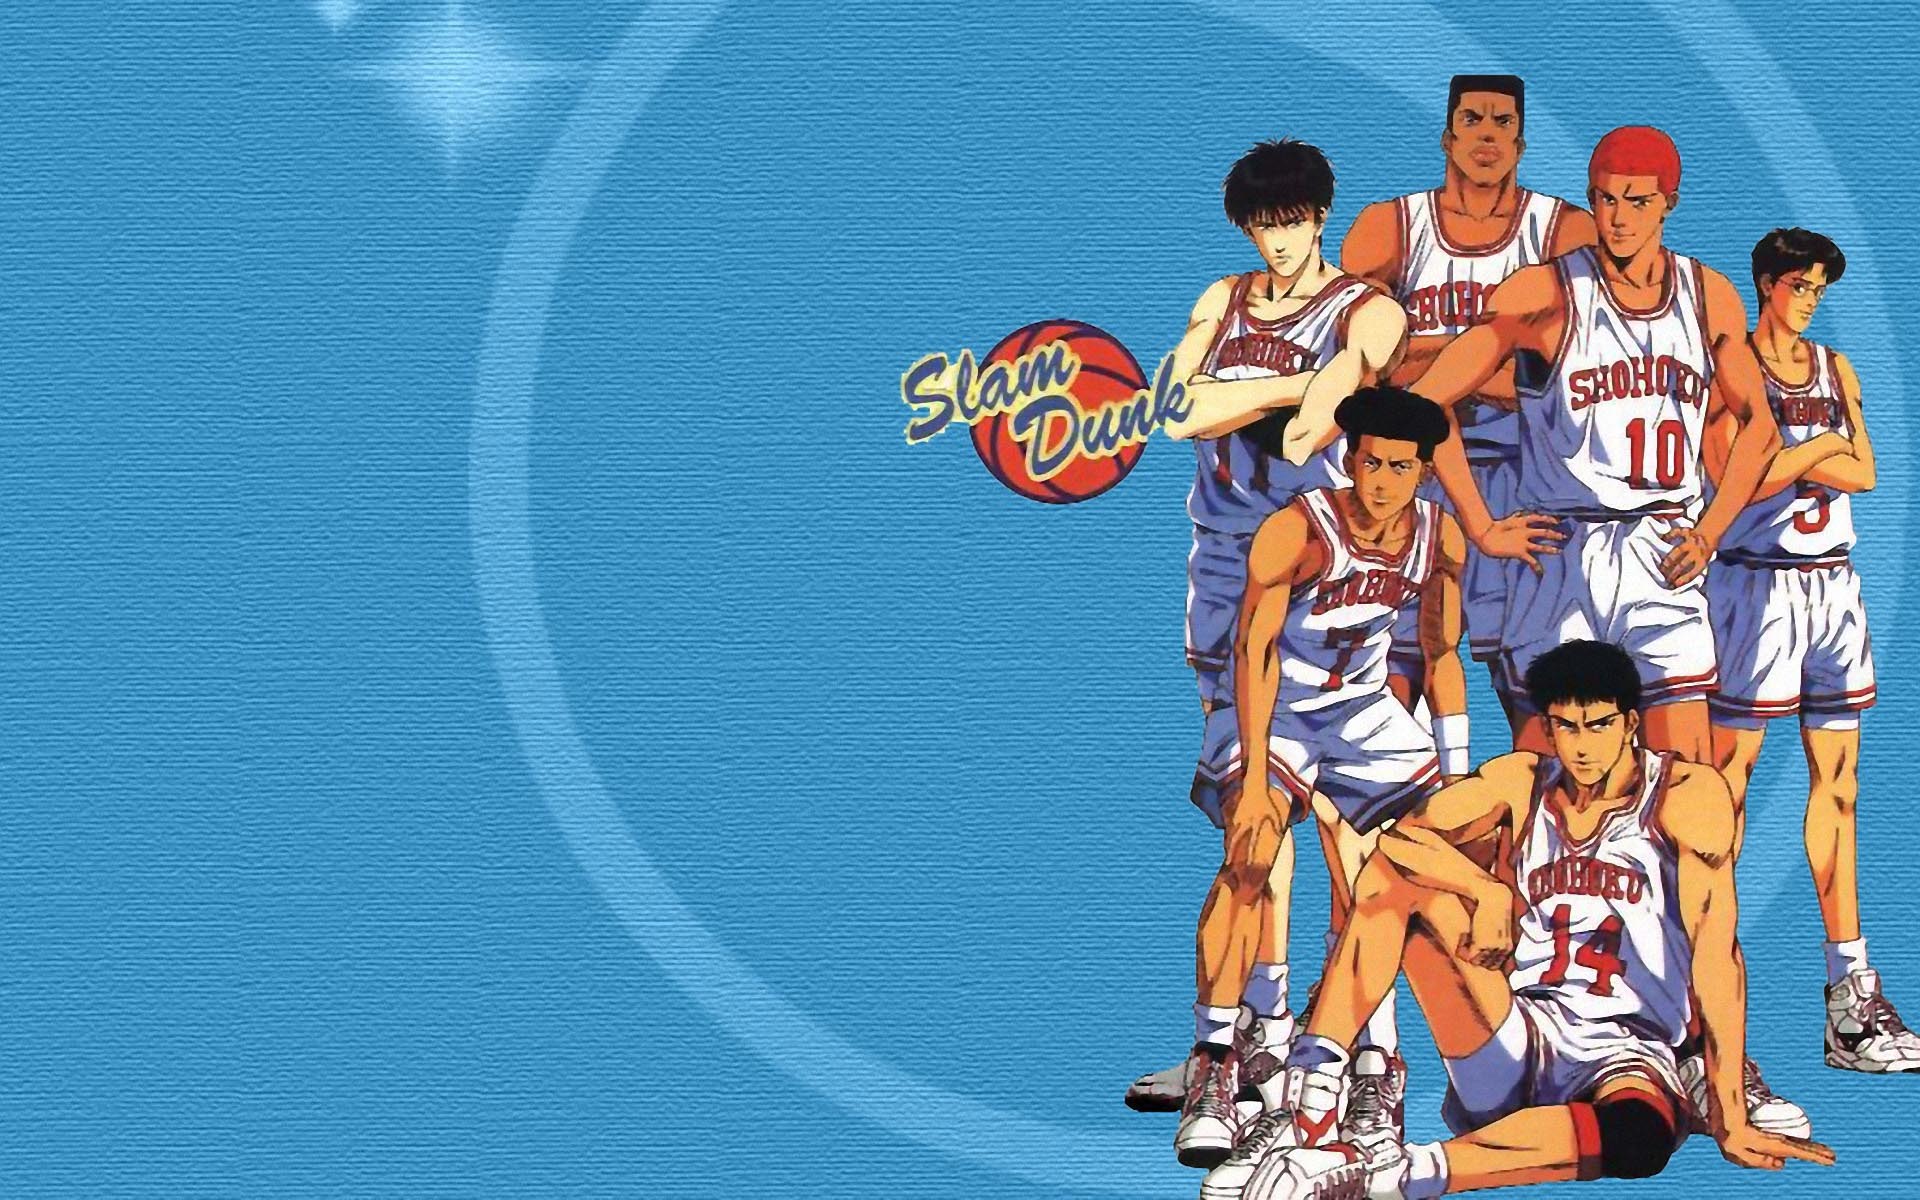 Wallpapers For > Slam Dunk Wallpapers 1920x1080